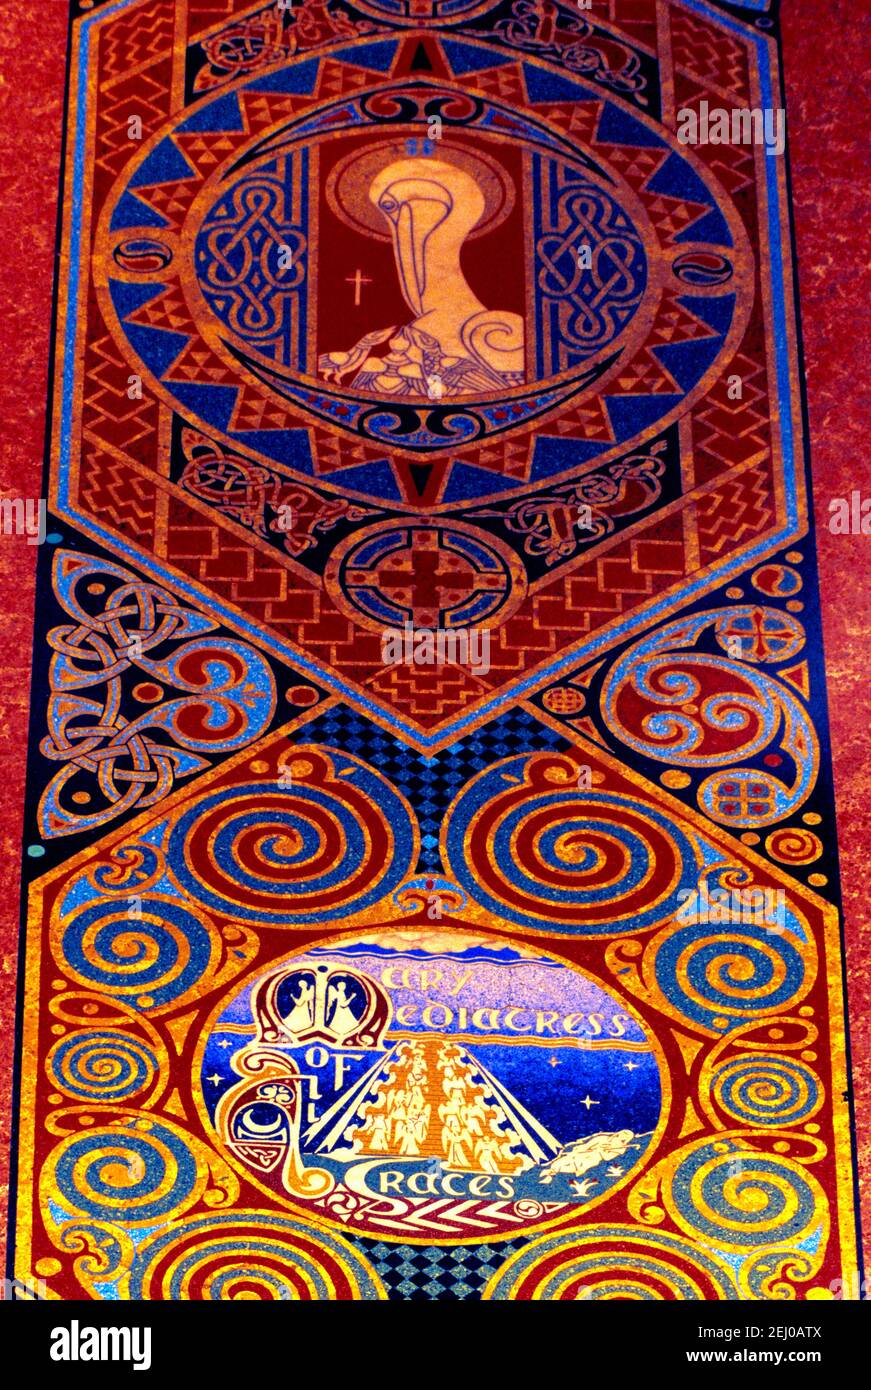 Sydney New South Wales Australia St Marys Cathedral Crypt Terazzo Mosaic Floor Depicting the Days of Creation inspired by the Book of Kells Stock Photo